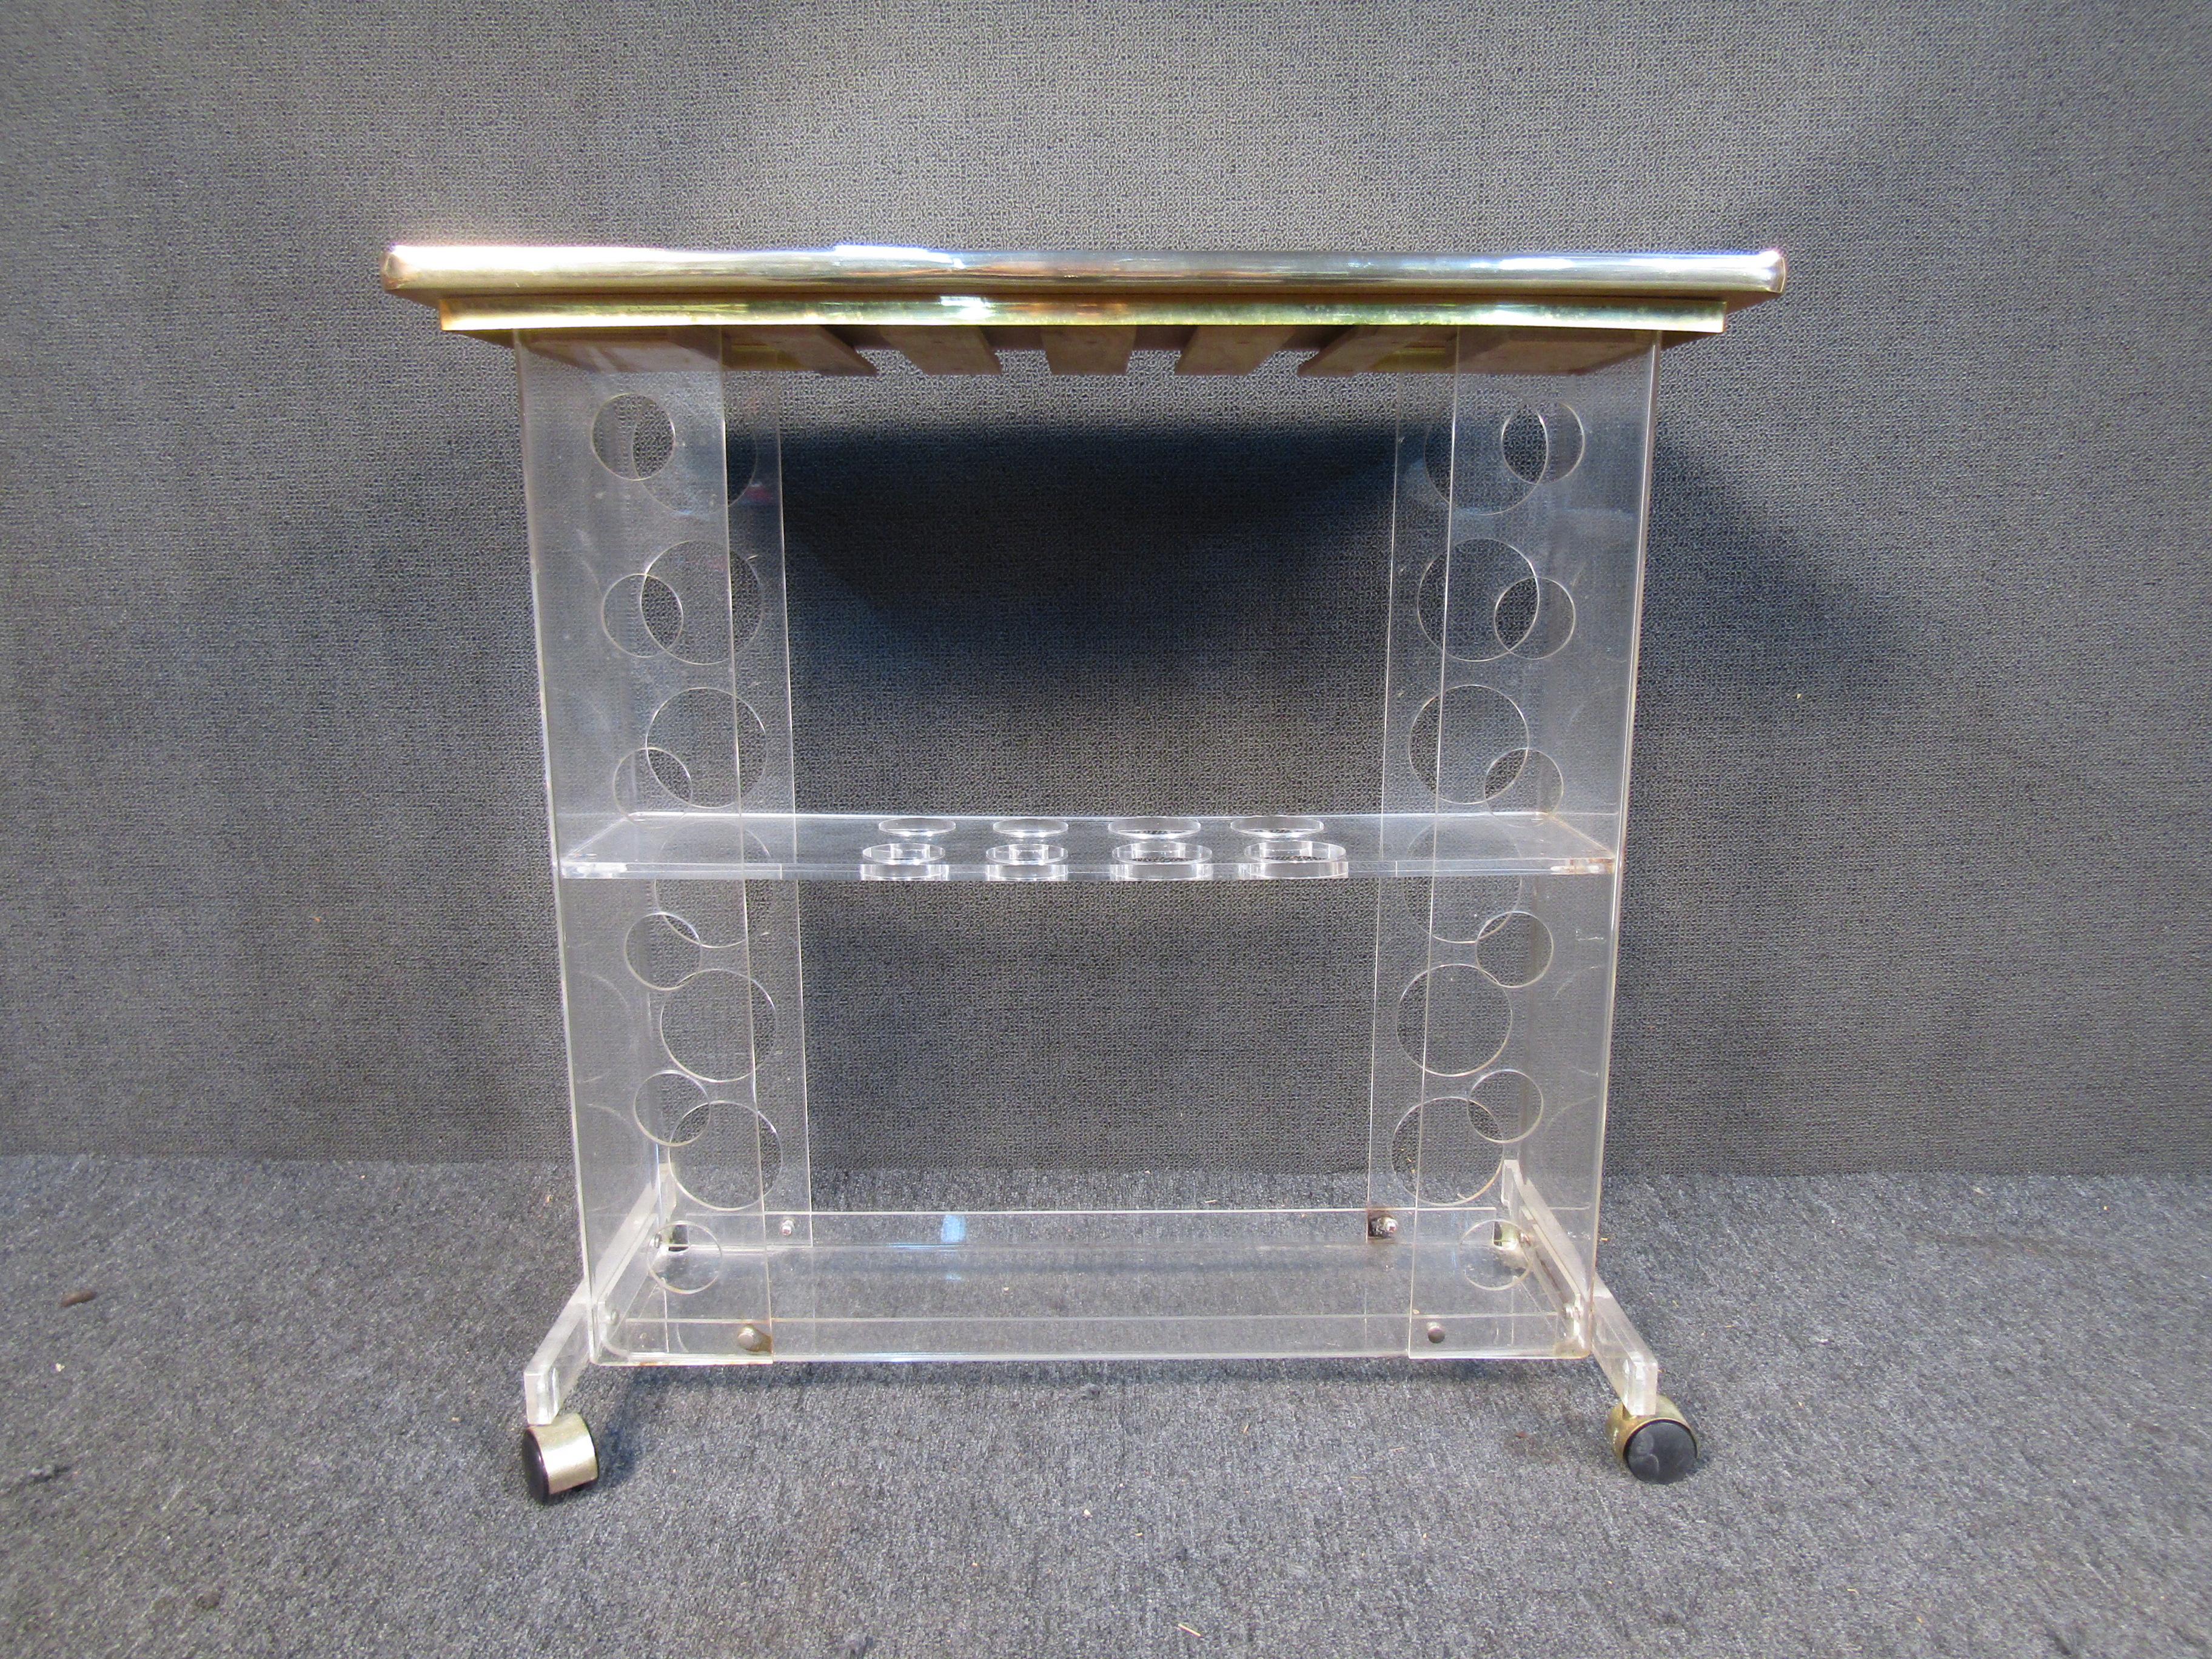 This vintage bar cart combines a lucite frame with metal accents and a mirrored top for a beautiful Mid-Century Modern look. Three tiers allow for a generous amount of storage along with circular cut-outs on the lucite that allow for storage of